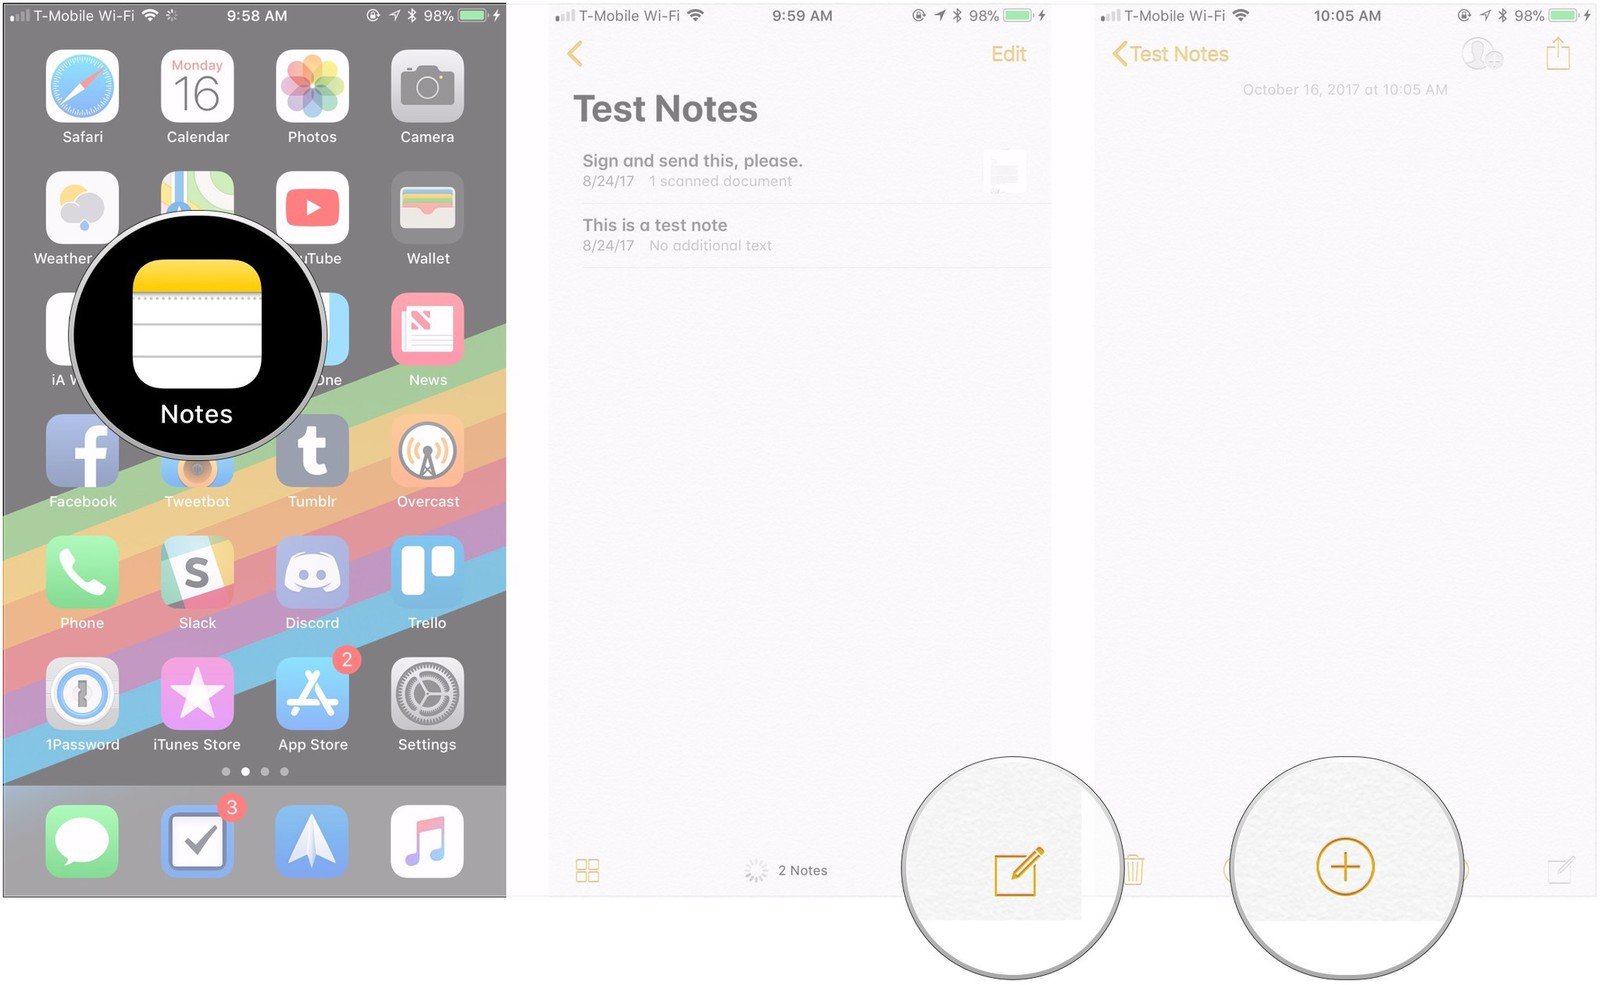 How to add photos, videos, scans, and sketches to Notes on iPhone.